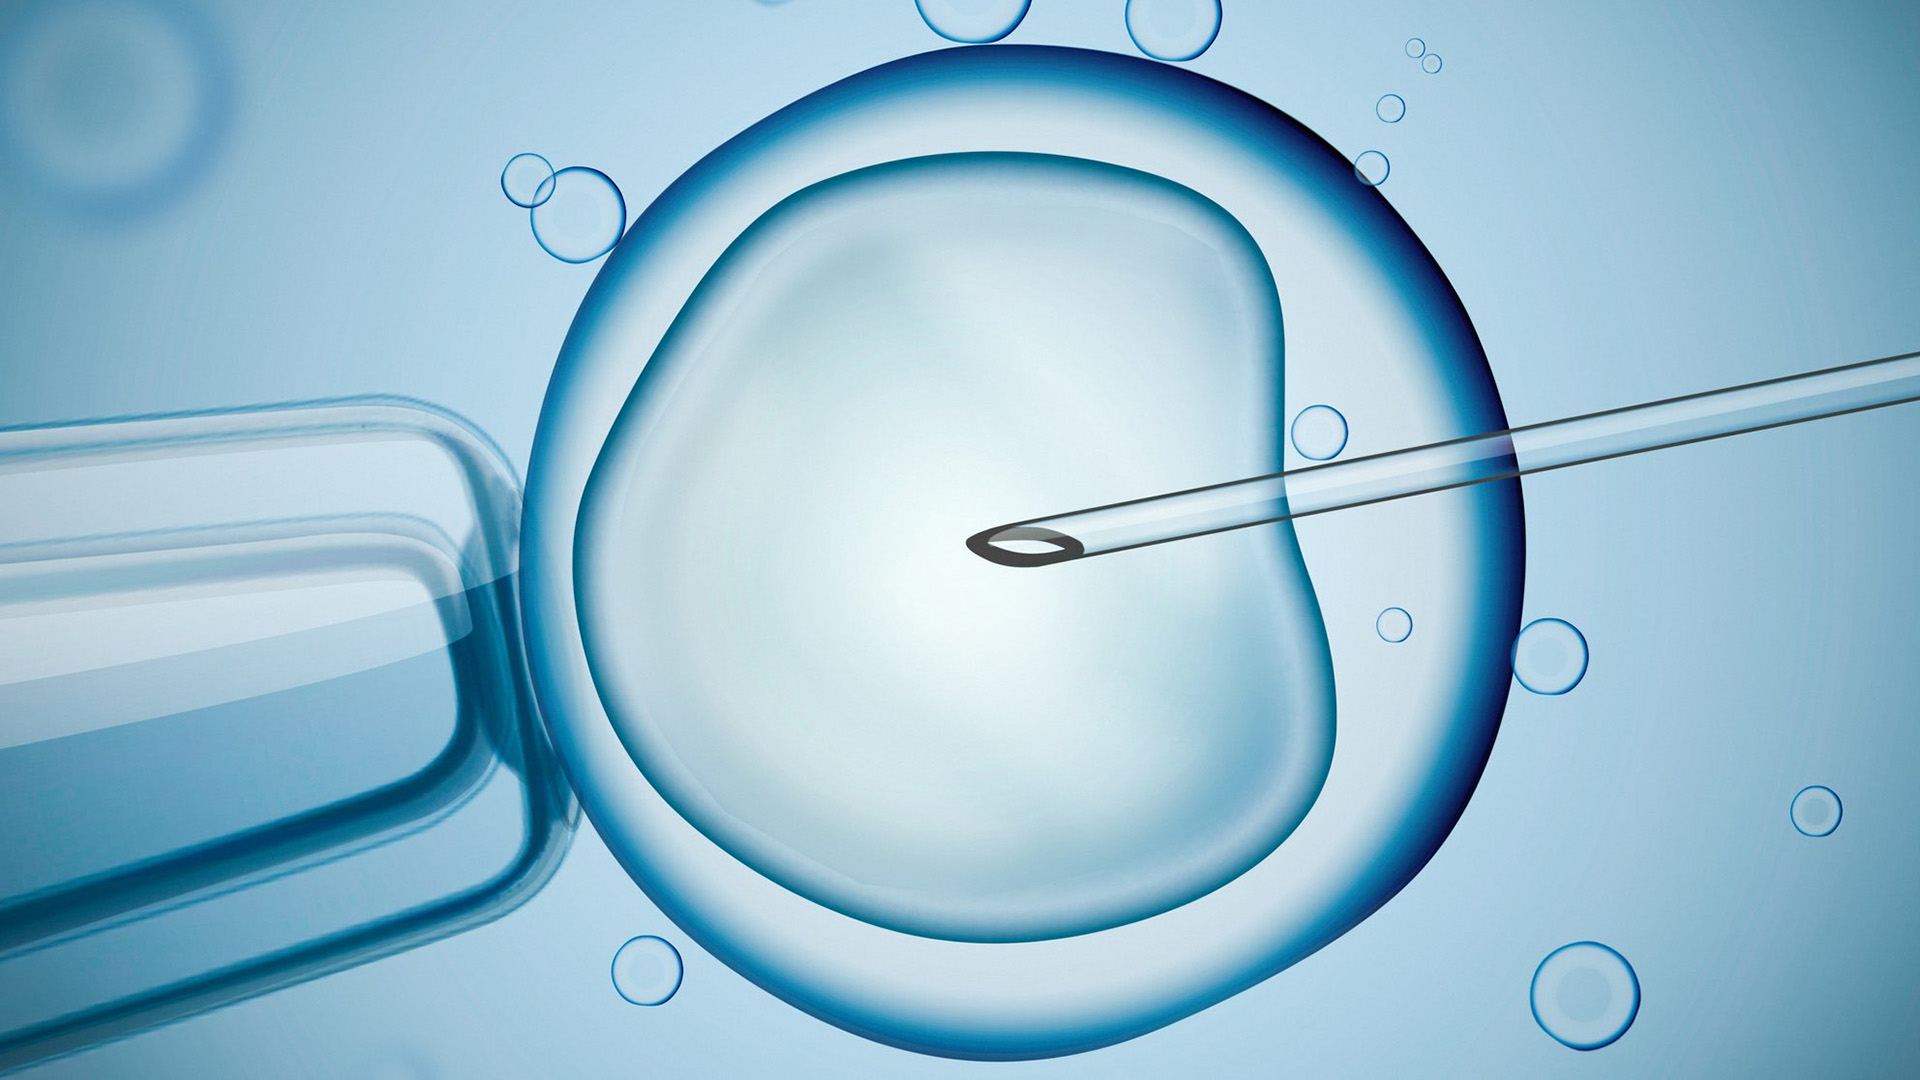 Image of IVF technique known as intracytoplasmic sperm injection.